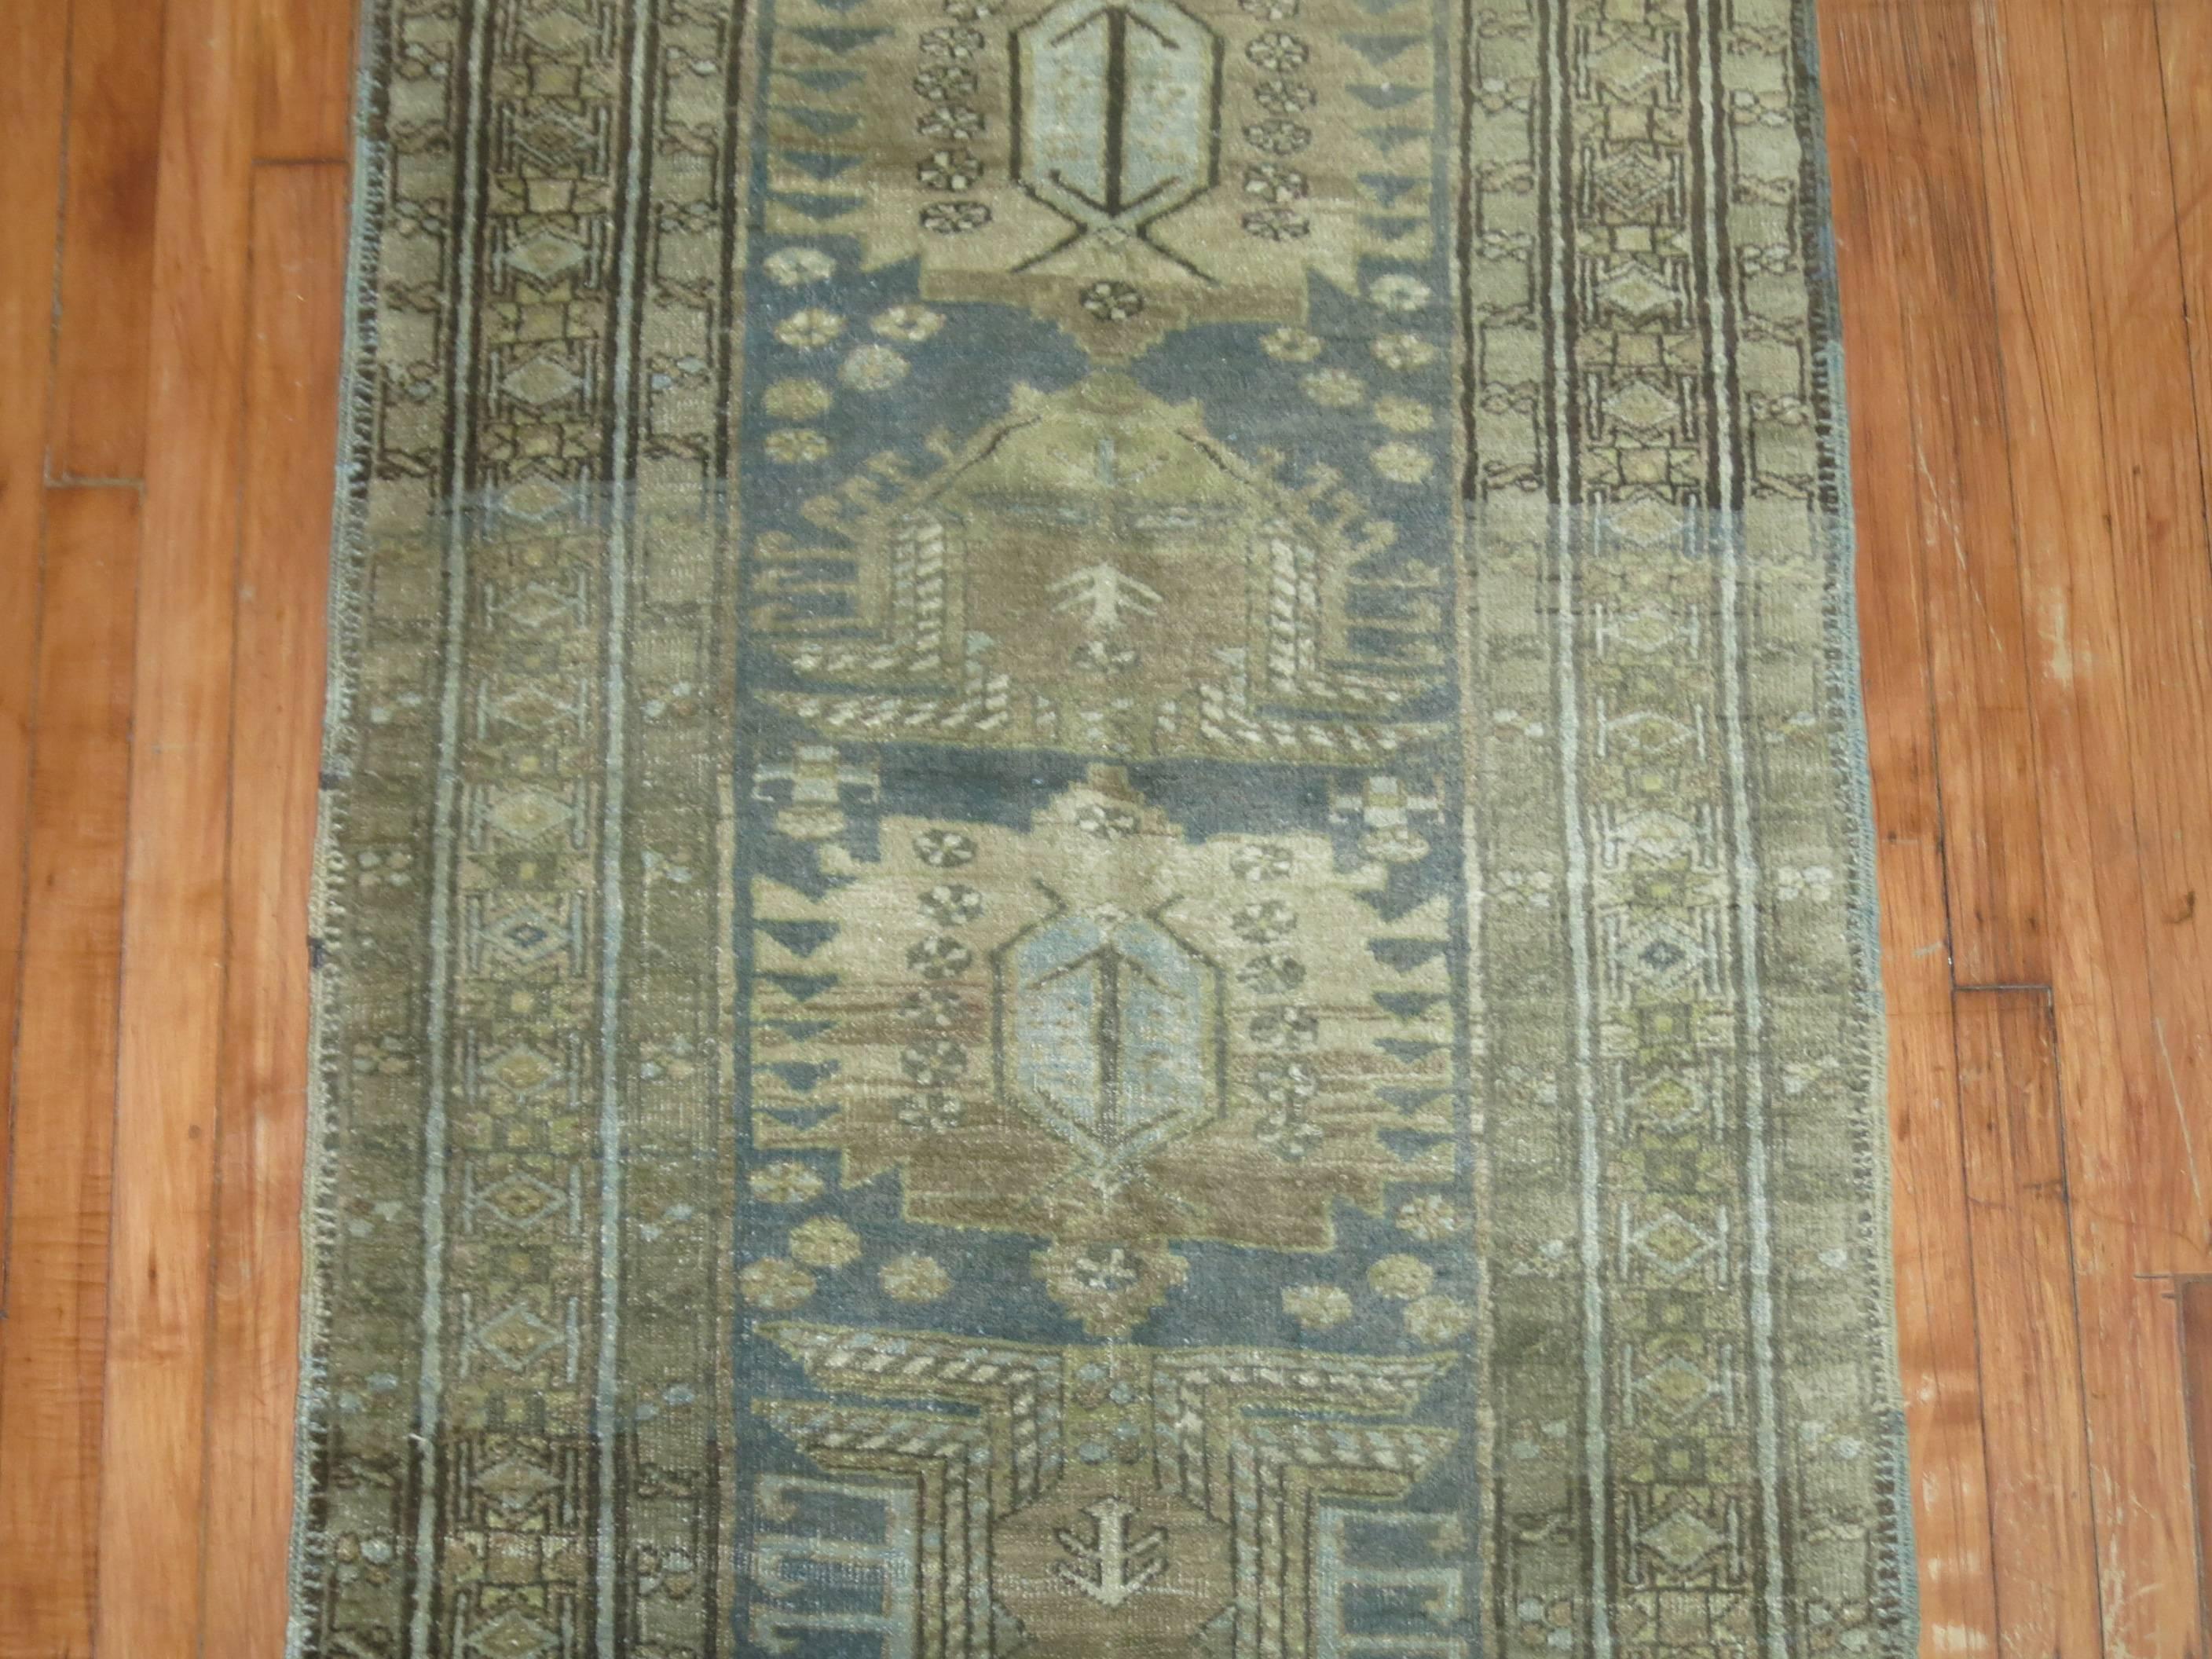 An antique Persian Heriz runner in faded blue, green and brown accents.